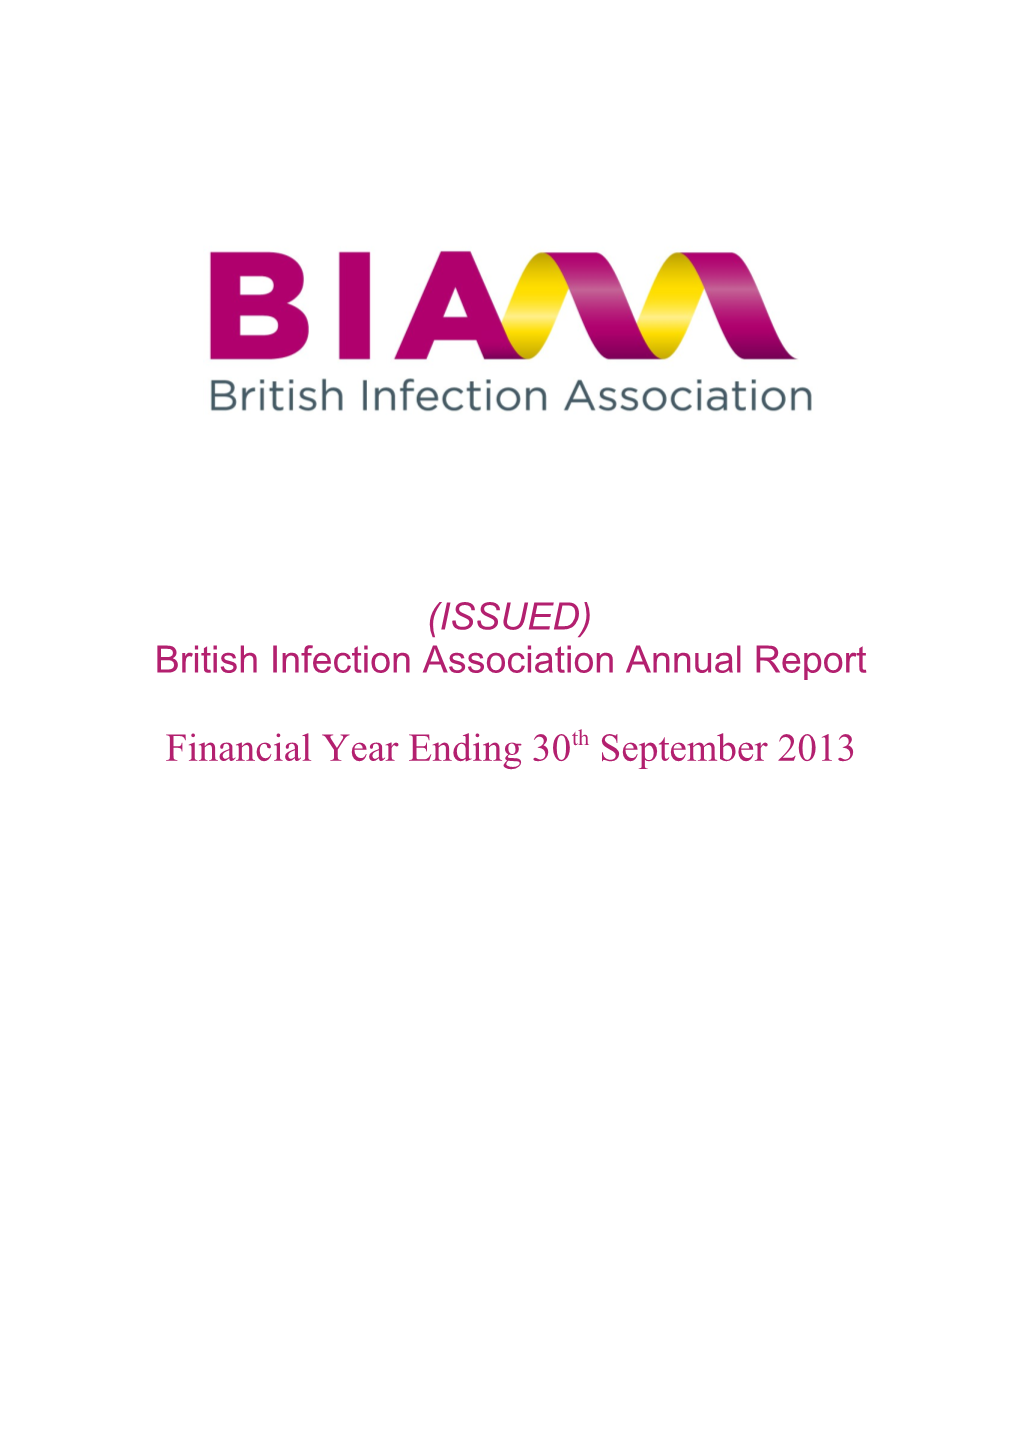 British Infection Association Annual Report